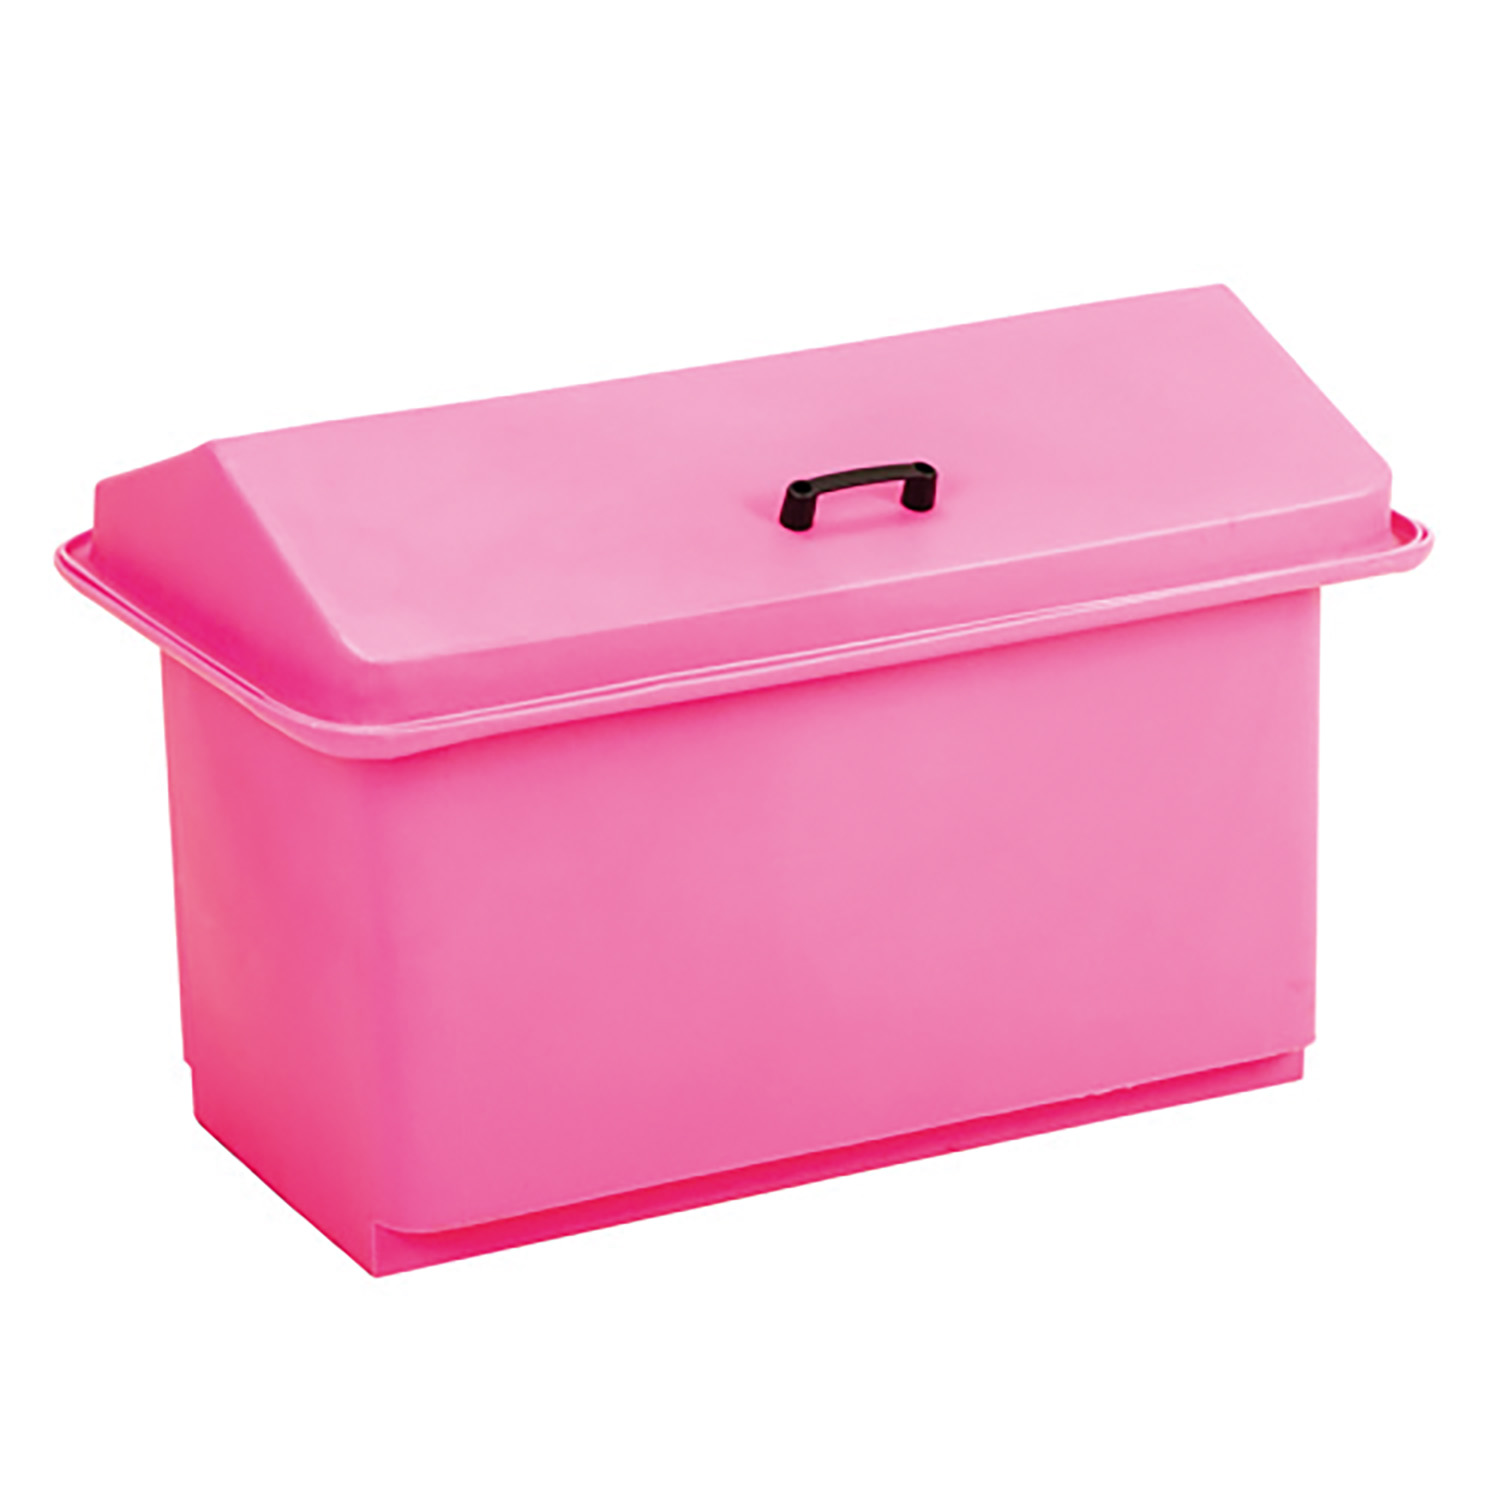 STUBBS STATIC CHEST ONE COMPARTMENT S5831 PINK ONE COMPARTMENT STATIC